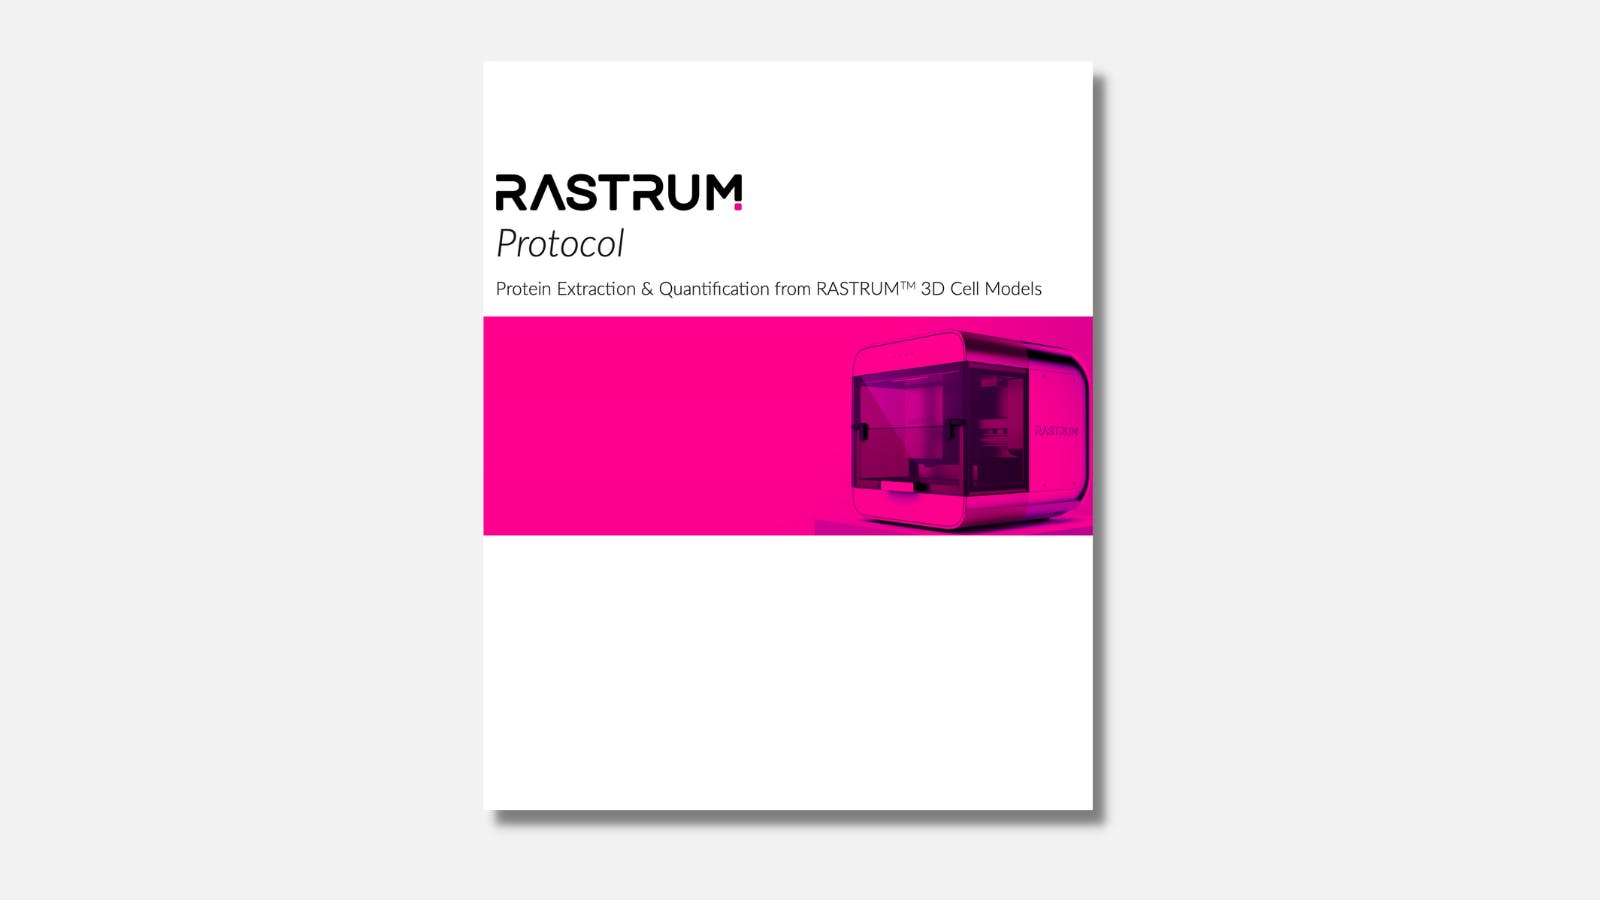 Protein Extraction & Quantification from RASTRUM™ 3D Cell Models